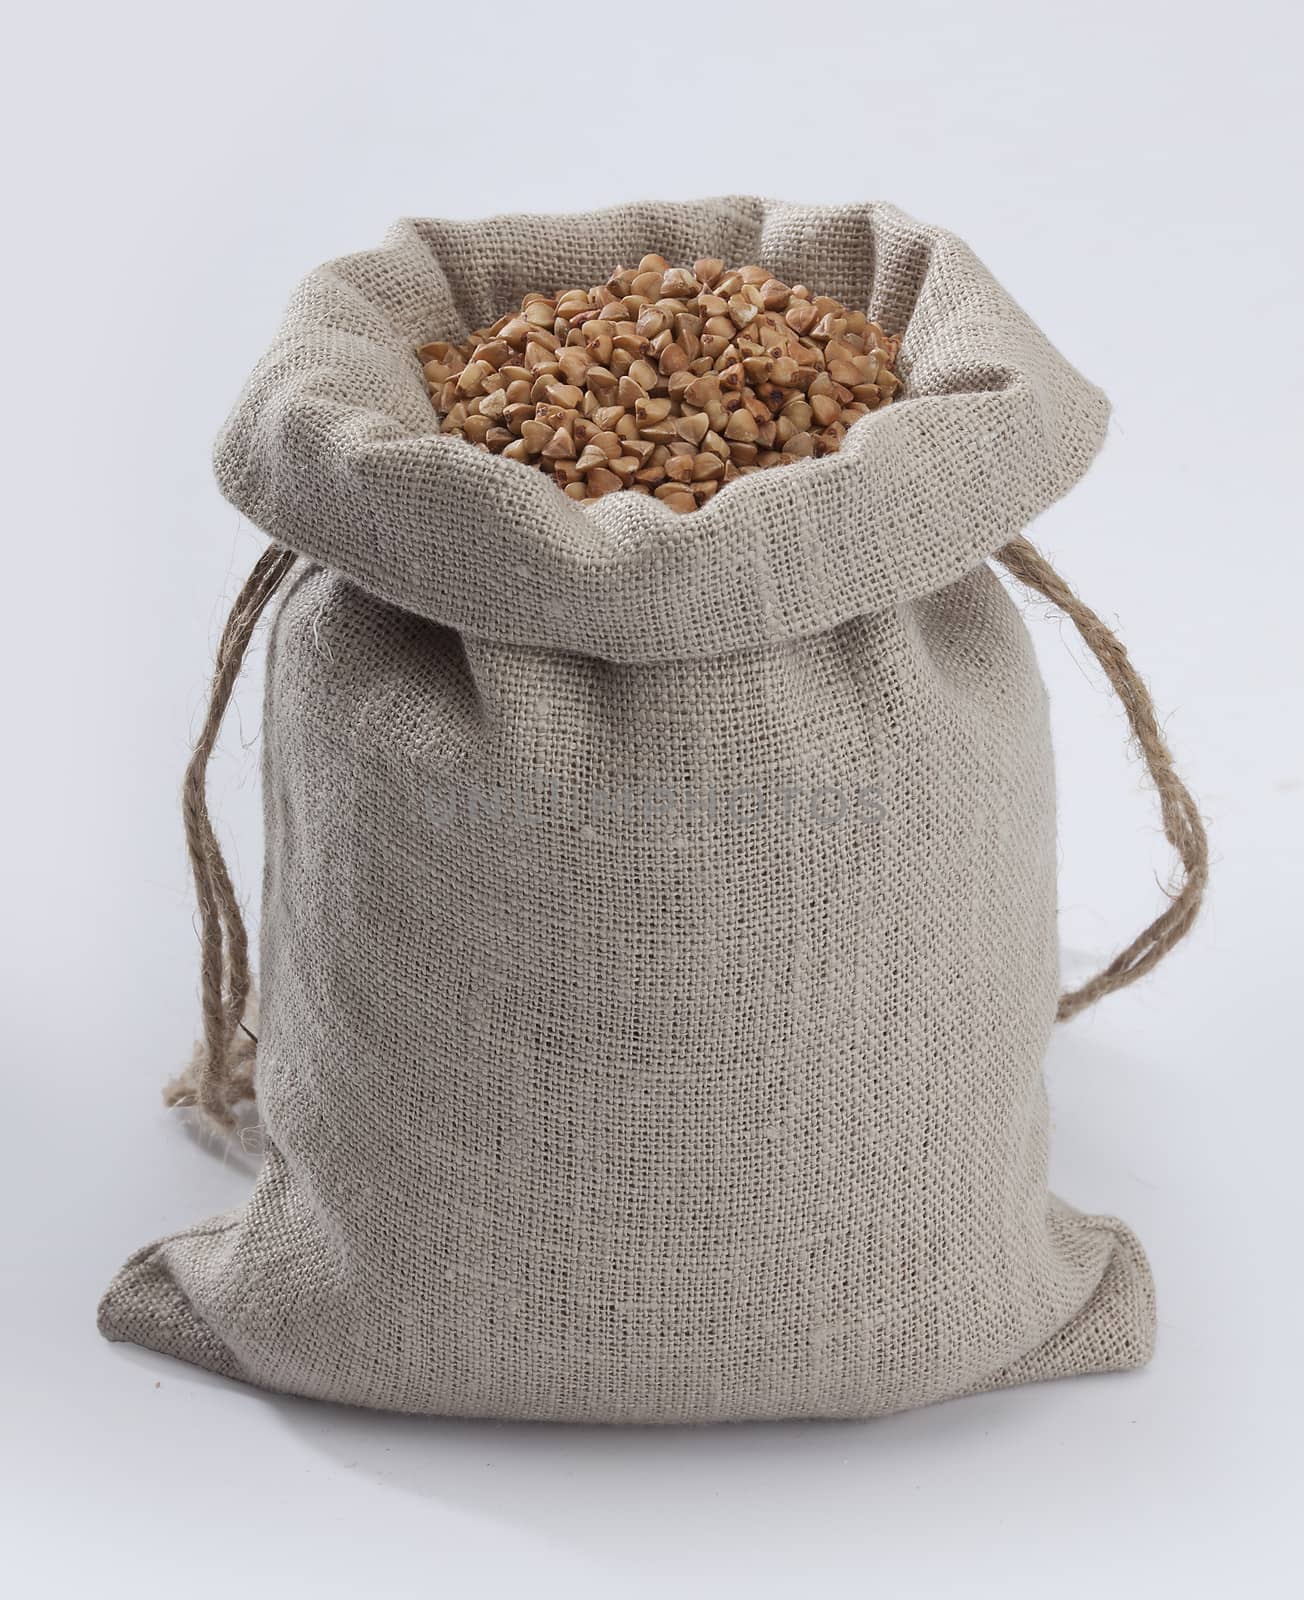 Buckwheat in the sack on the gray background